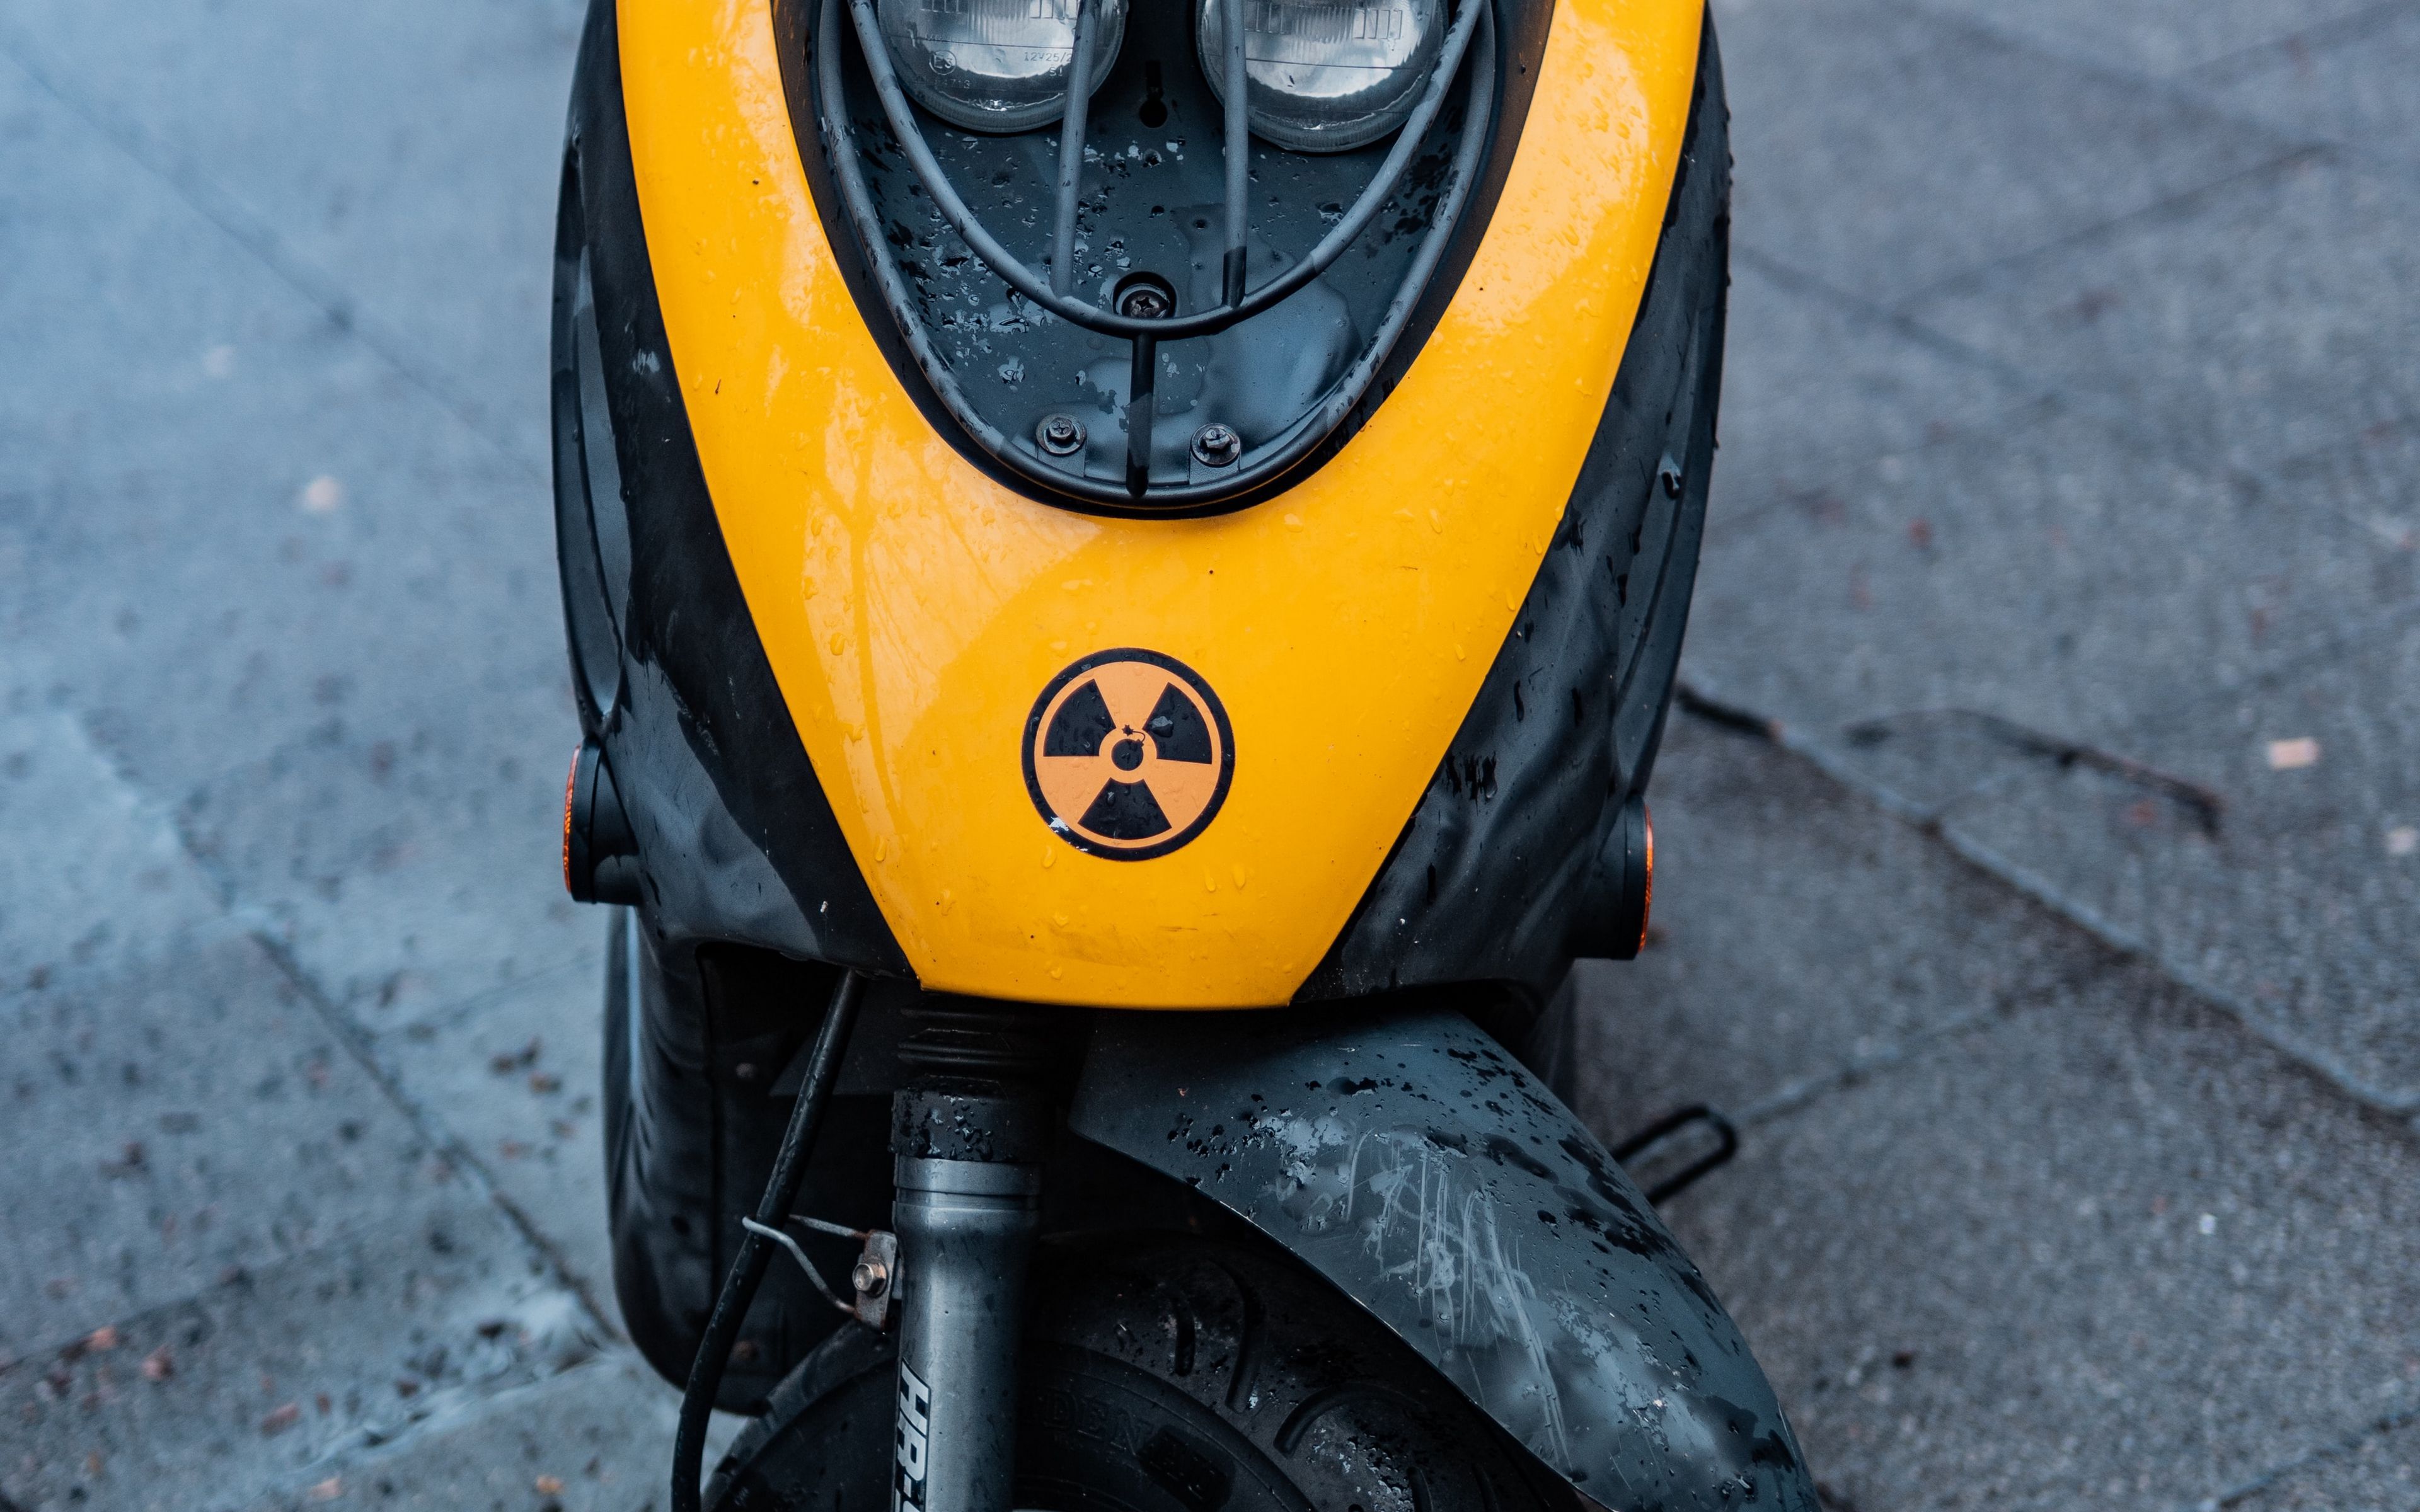 Download wallpaper 3840x2400 moped, scooter, yellow, wet, front view 4k ultra HD 16:10 HD background